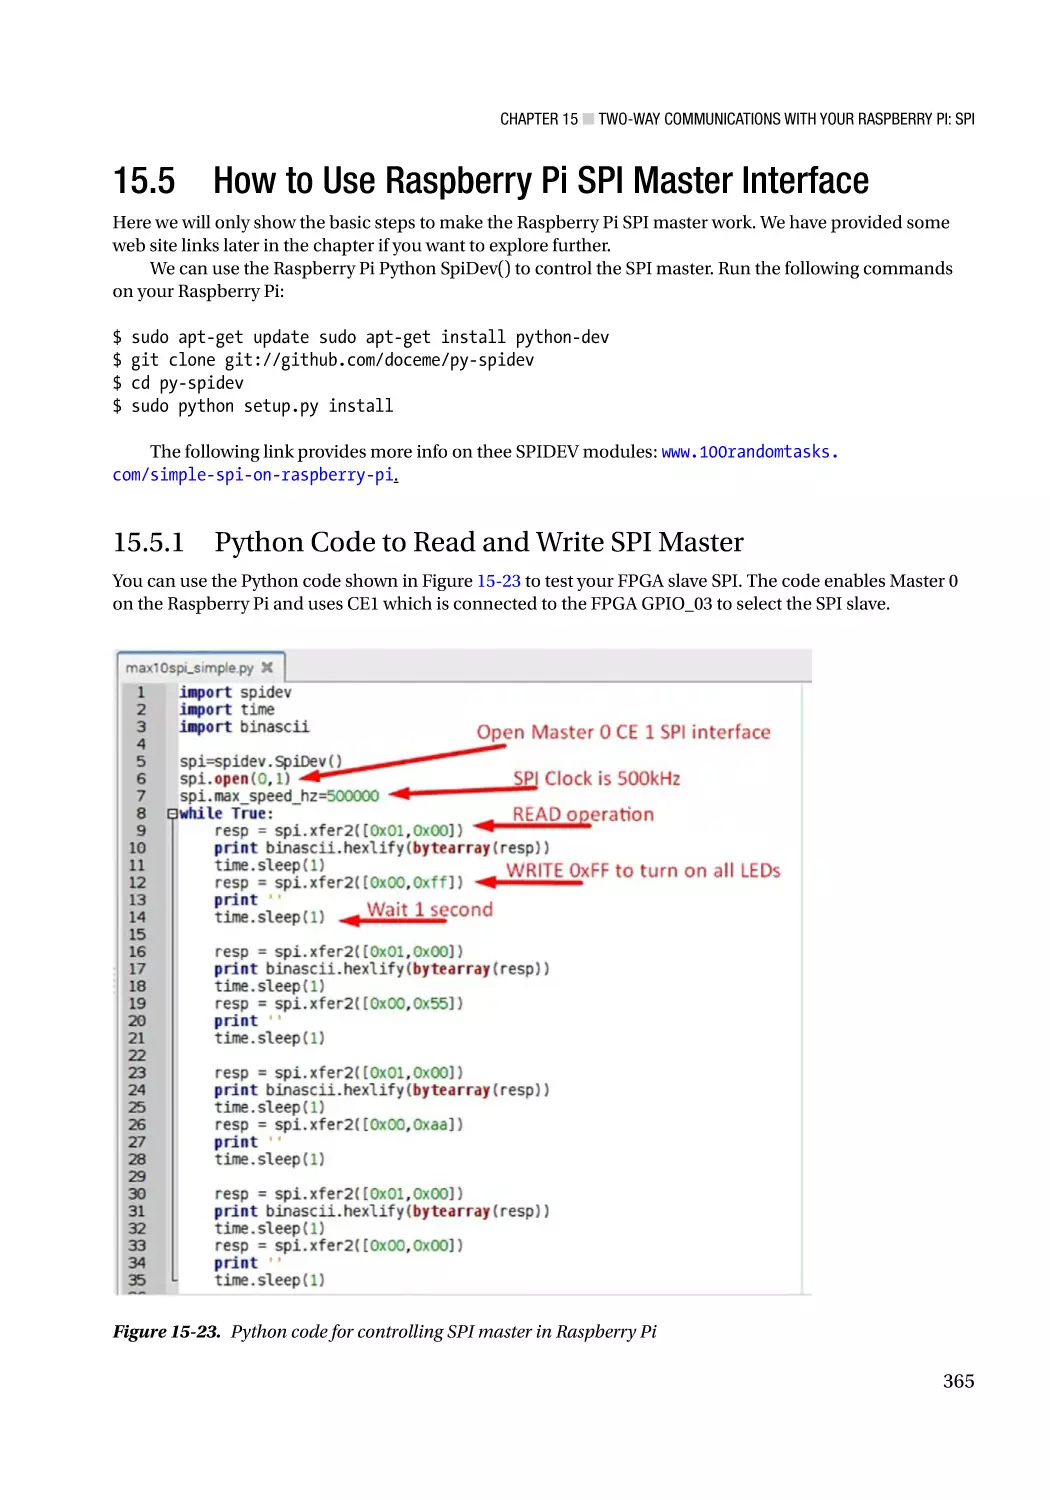 15.5 How to Use Raspberry Pi SPI Master Interface
15.5.1 Python Code to Read and Write SPI Master